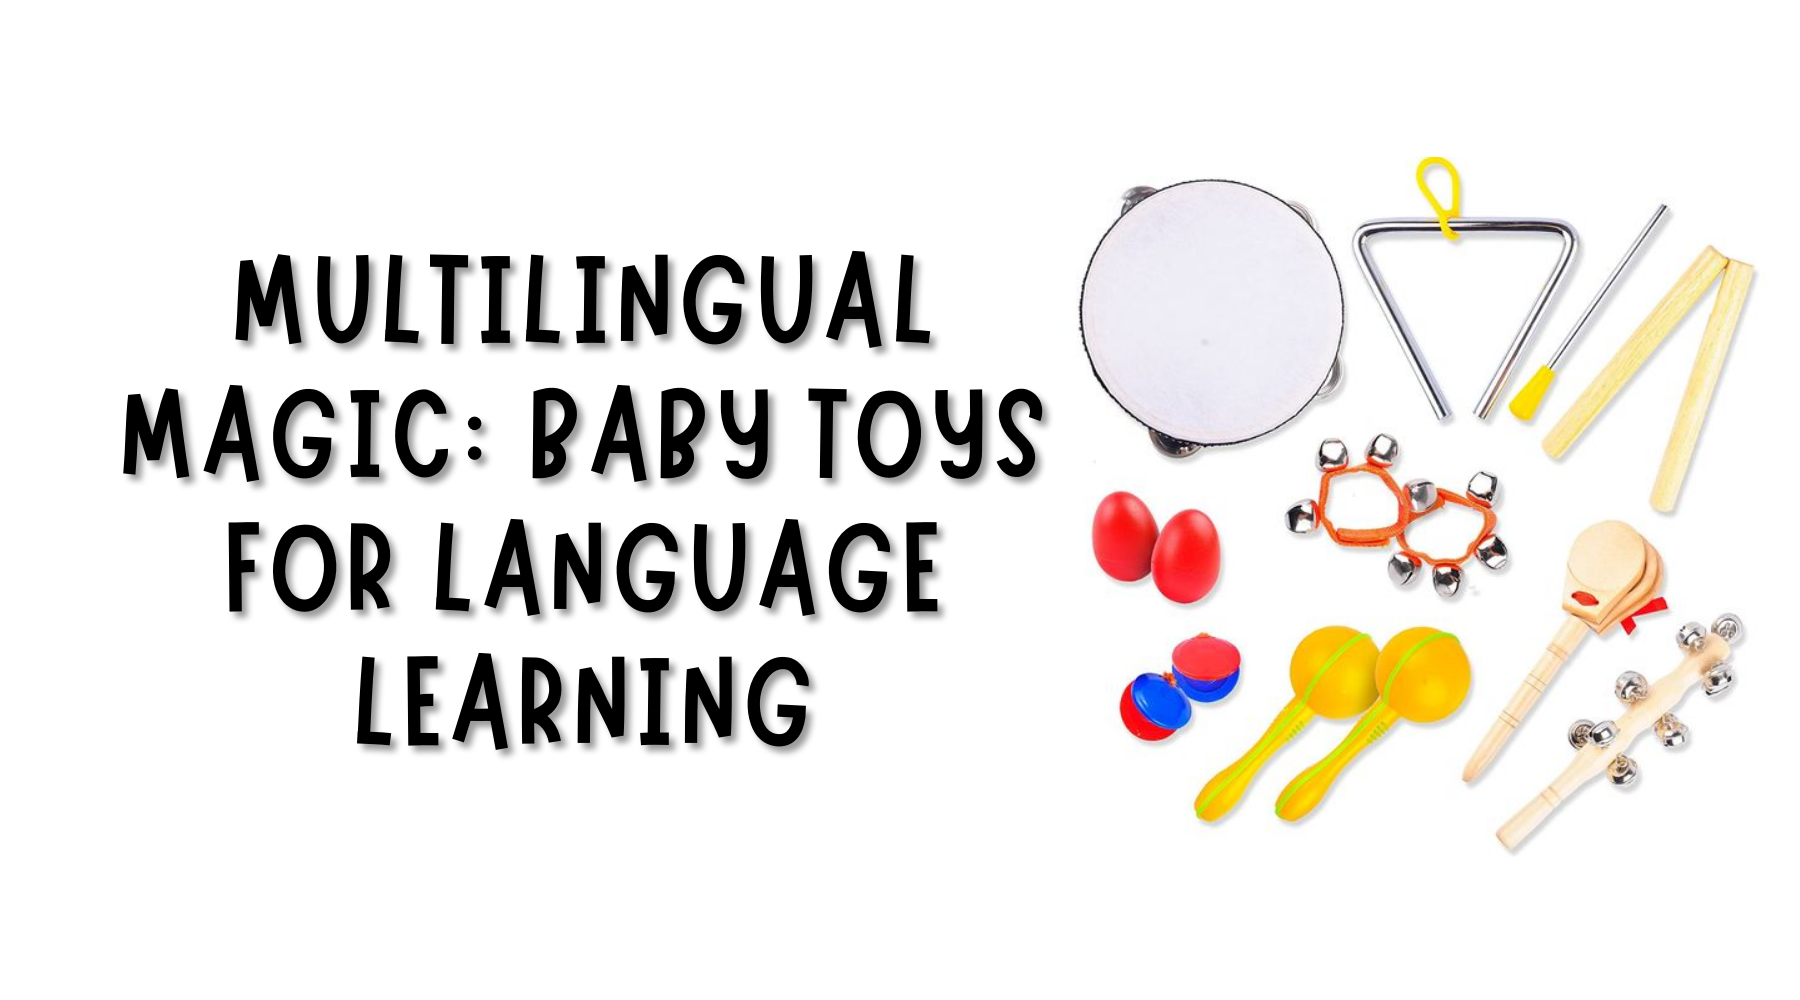 Baby Toys for Language Learning